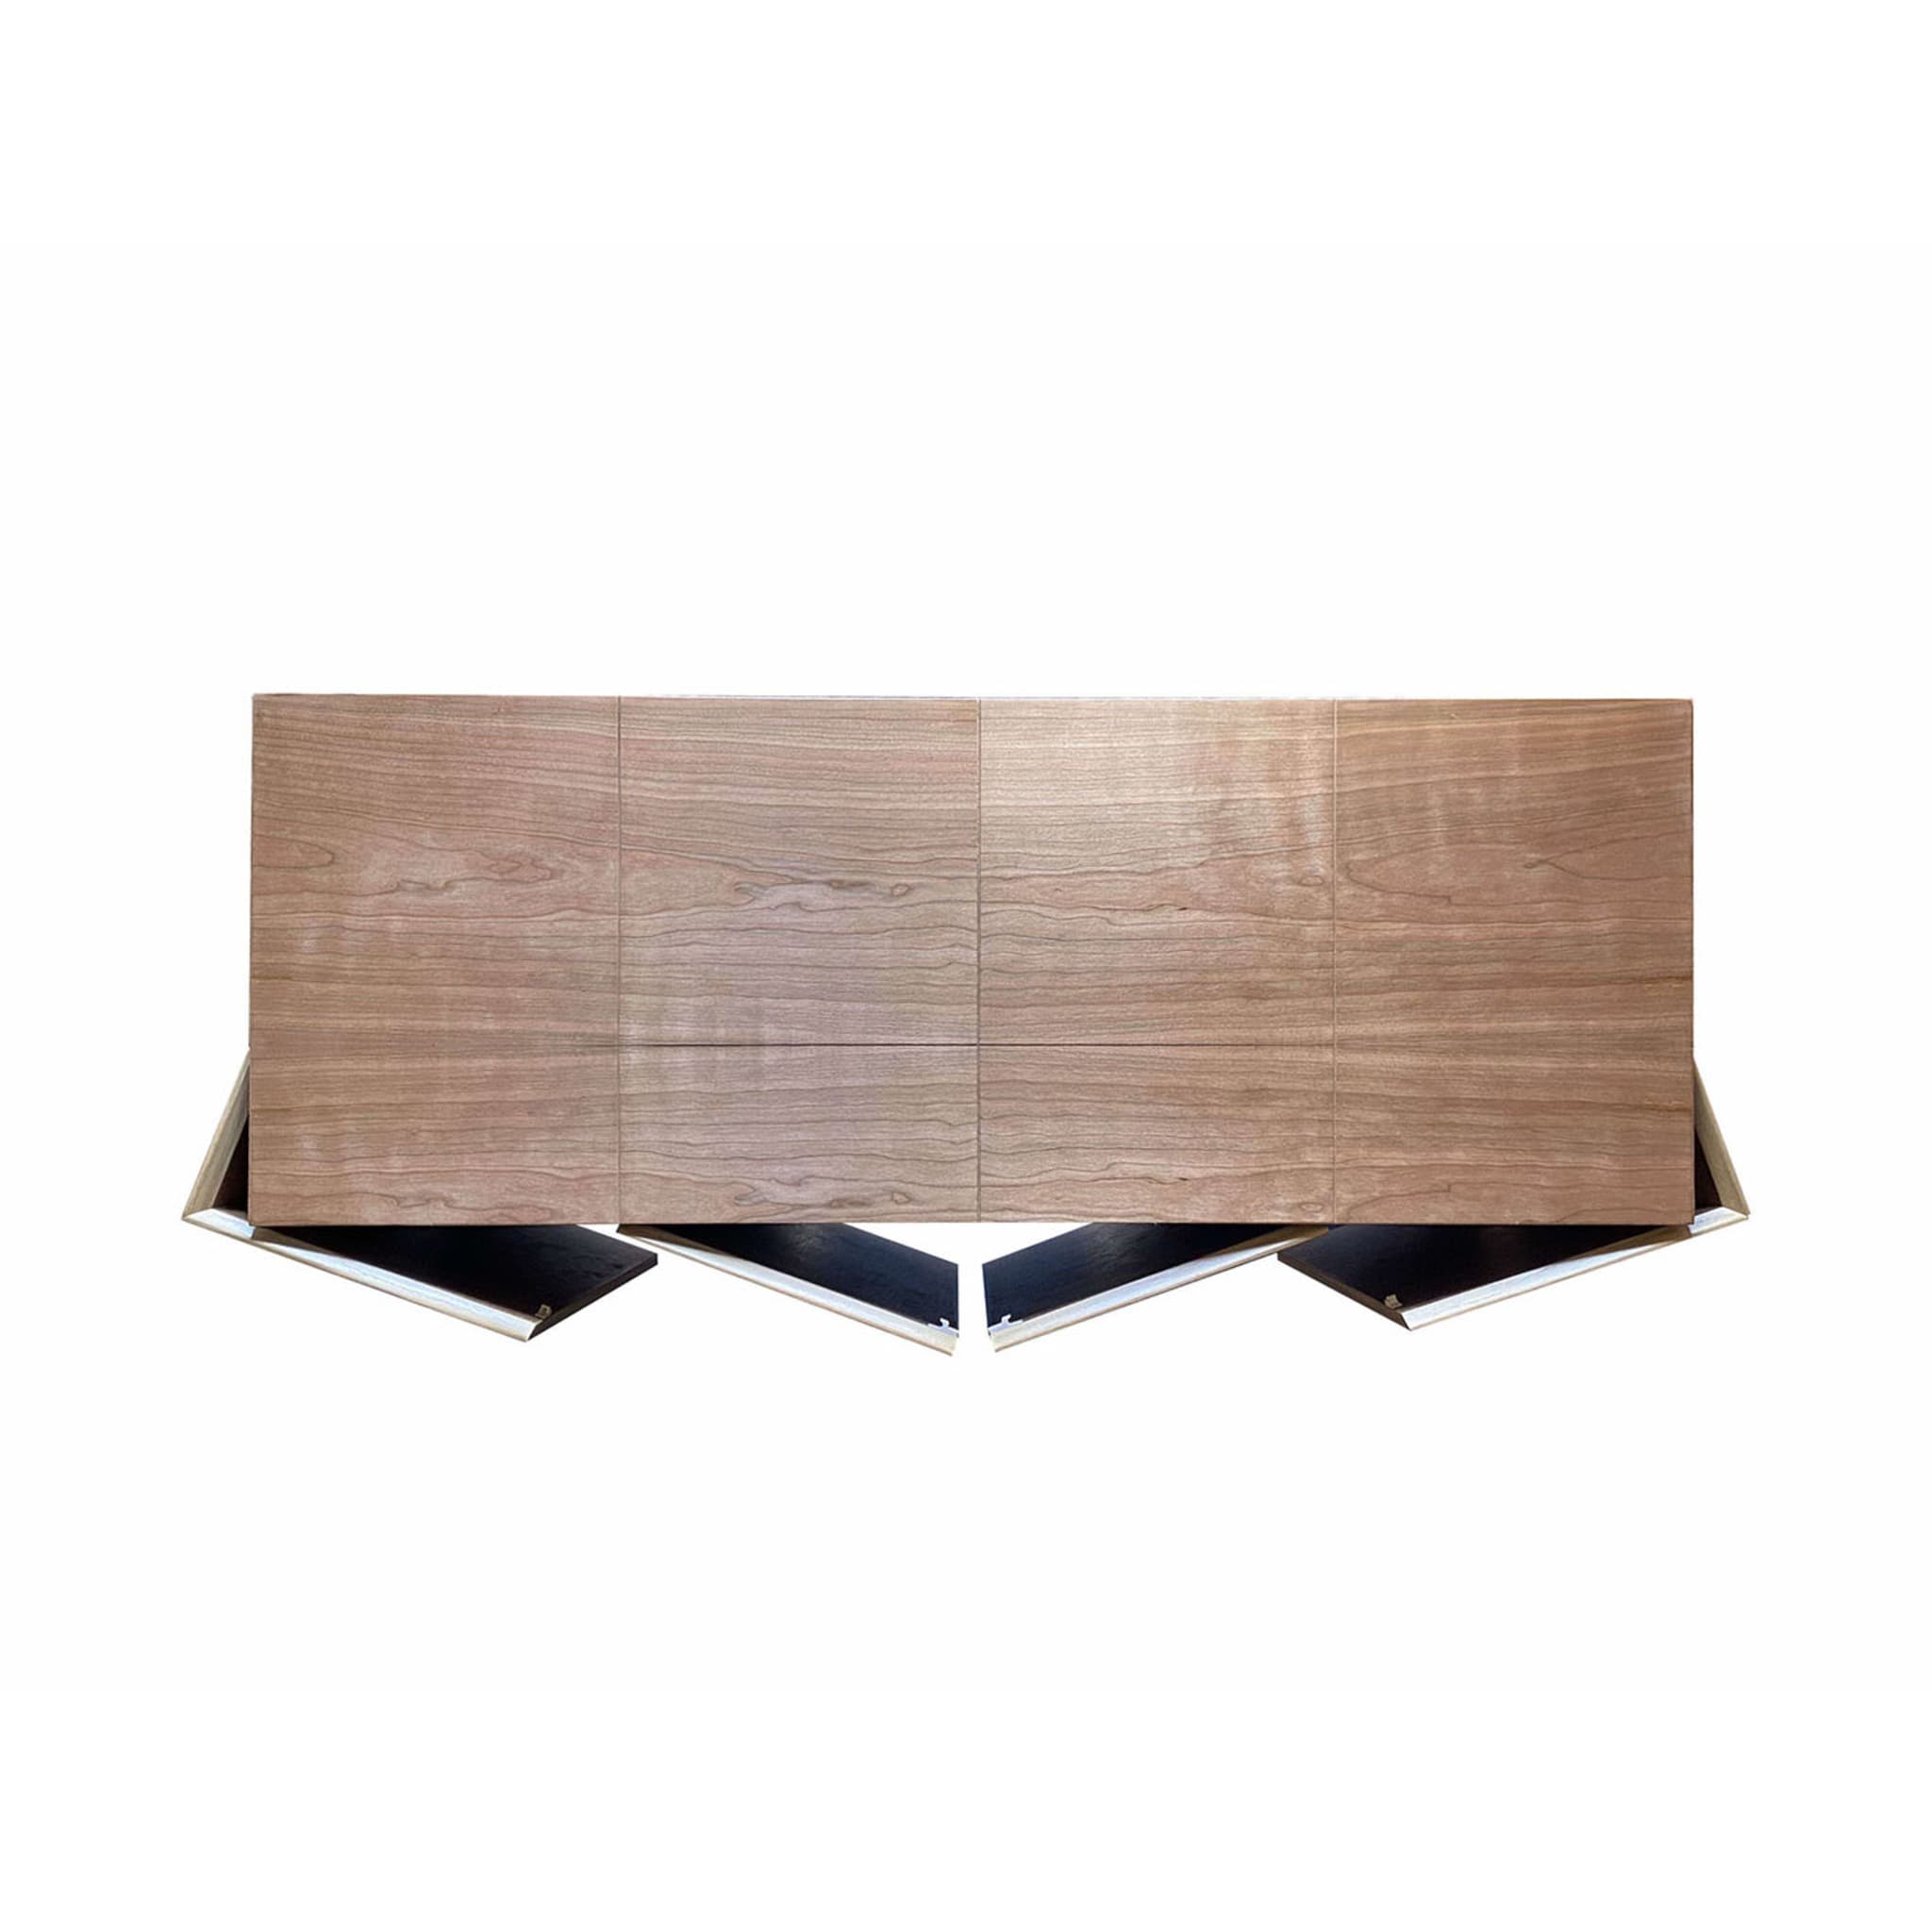 Md6 4-Door Striped Sideboard by Meccani Studio - Alternative view 3